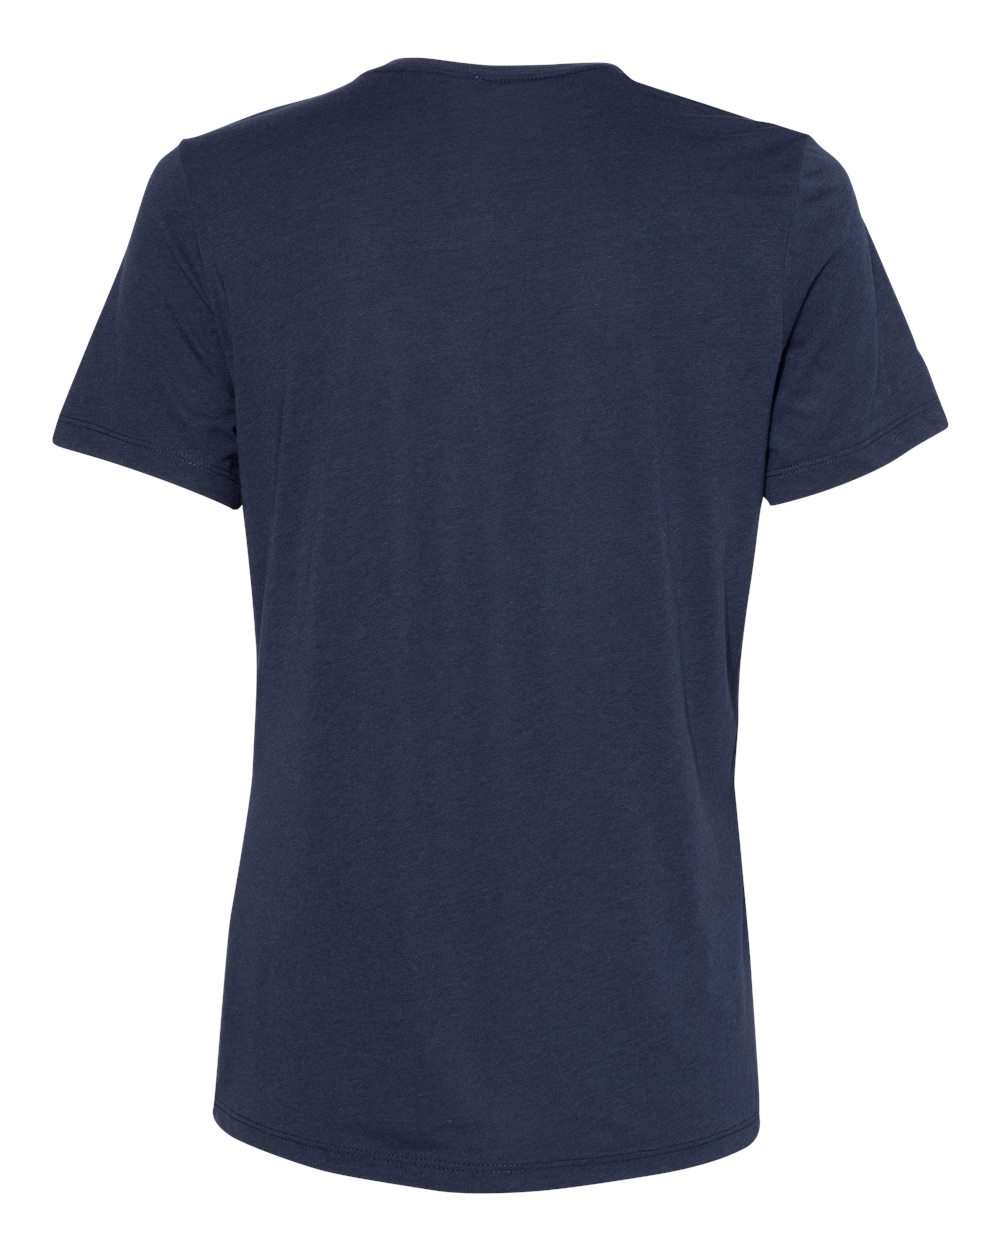 Solid-Navy-Triblend